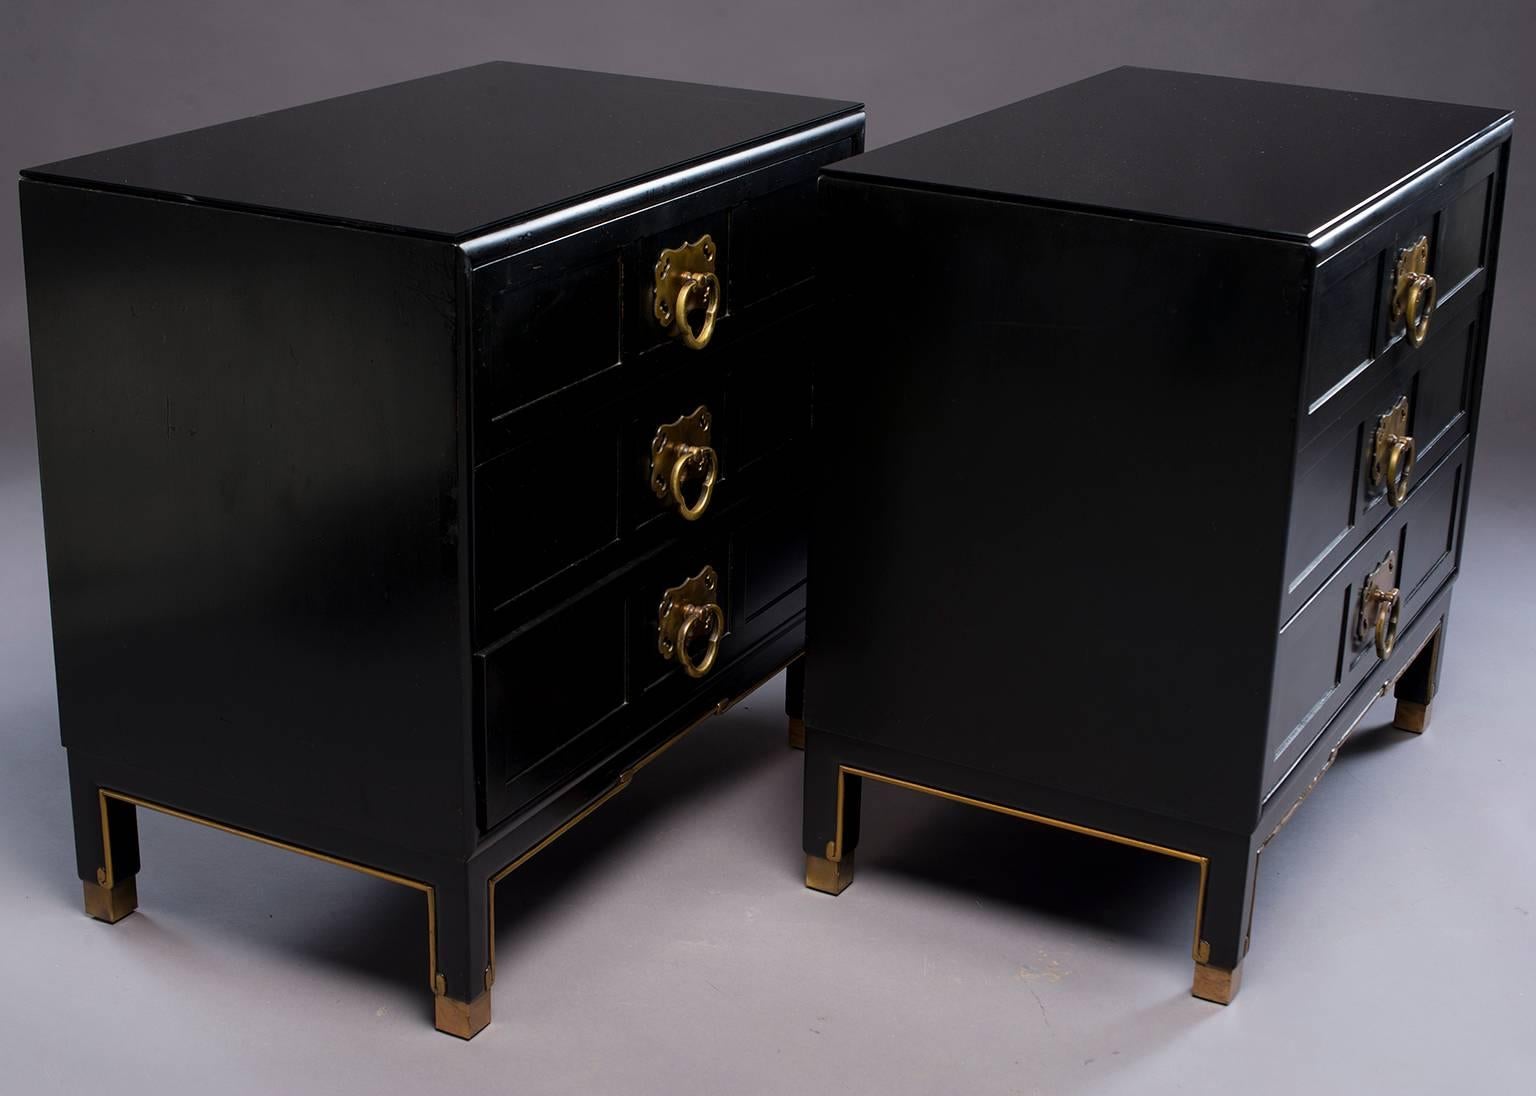 Pair of small three drawer chests with Asian styling. Black lacquer finish with original brass hardware, gilded details, brass foot caps and new custom glass tops. Tag from now defunct American manufacturer Treasure Chest Furniture from Zeeland, MI